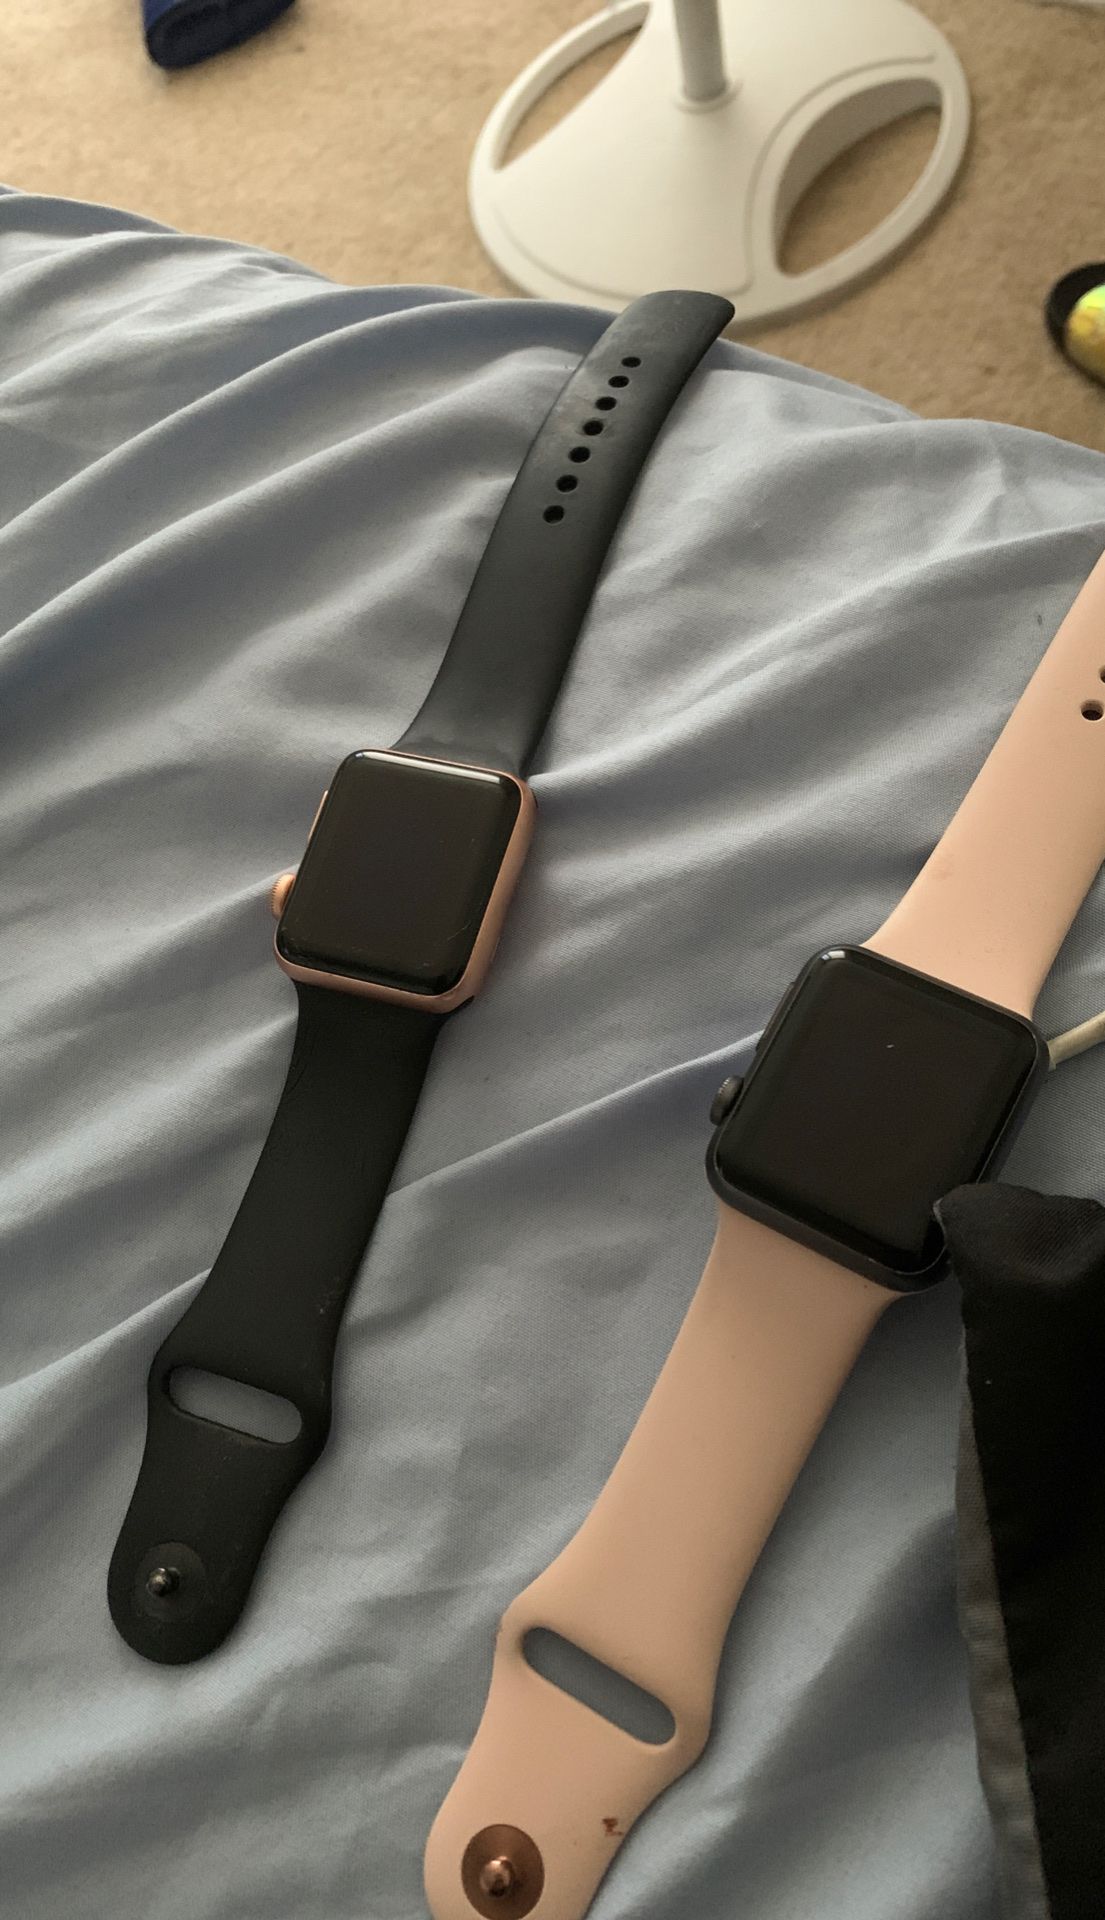 Series 1 and 3 Apple Watch